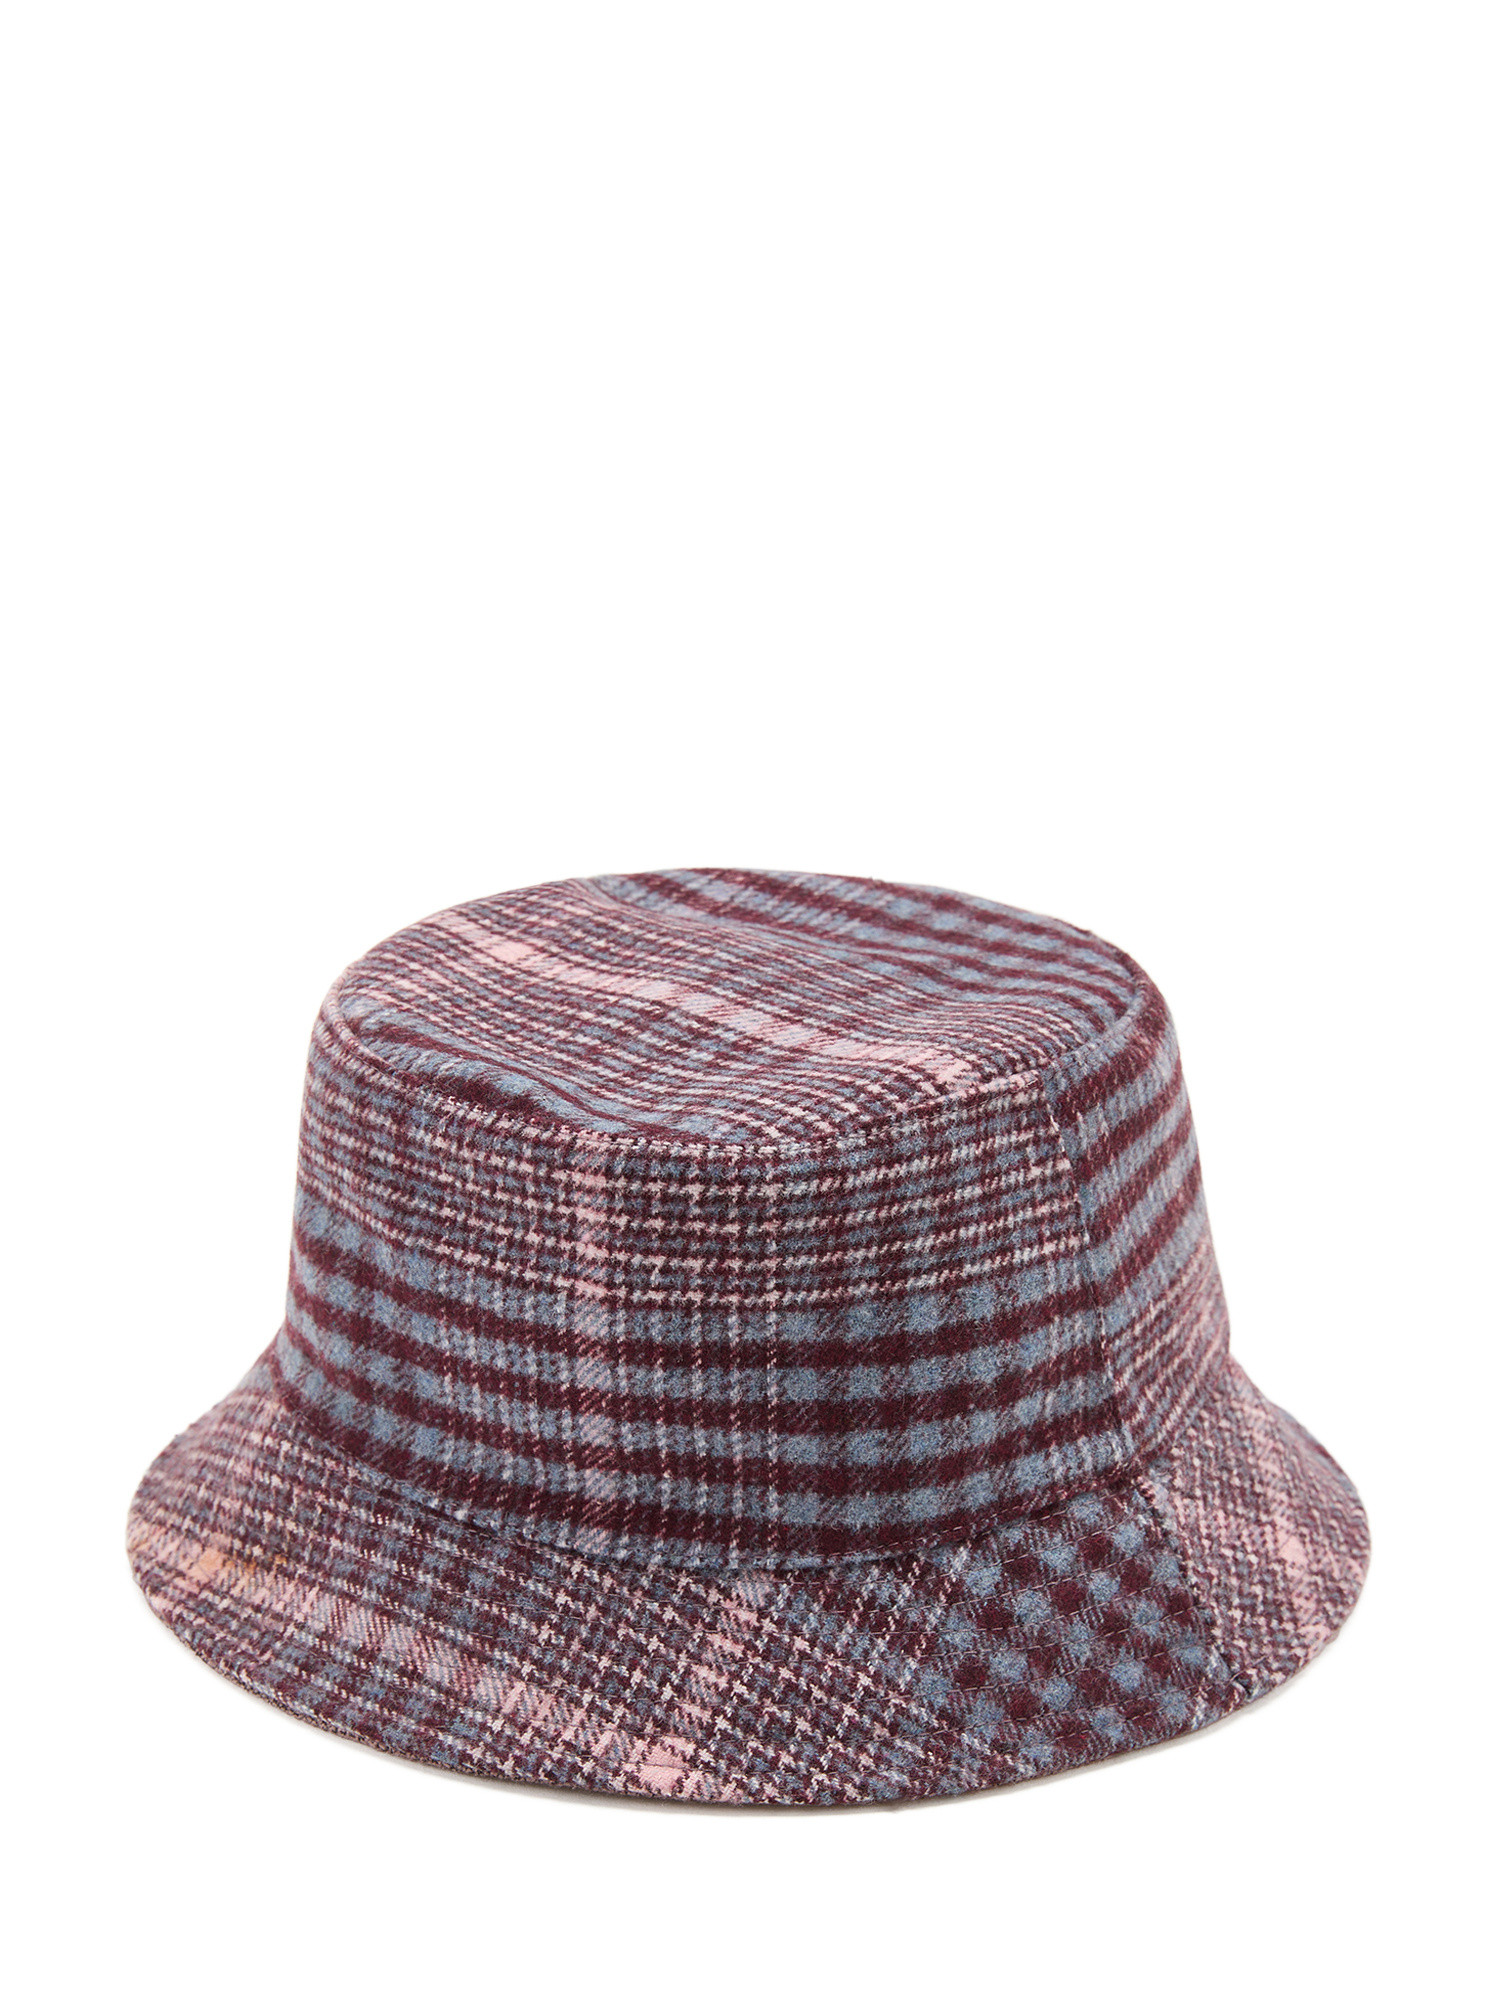 Koan - Checked cloche hat, Pink, large image number 0